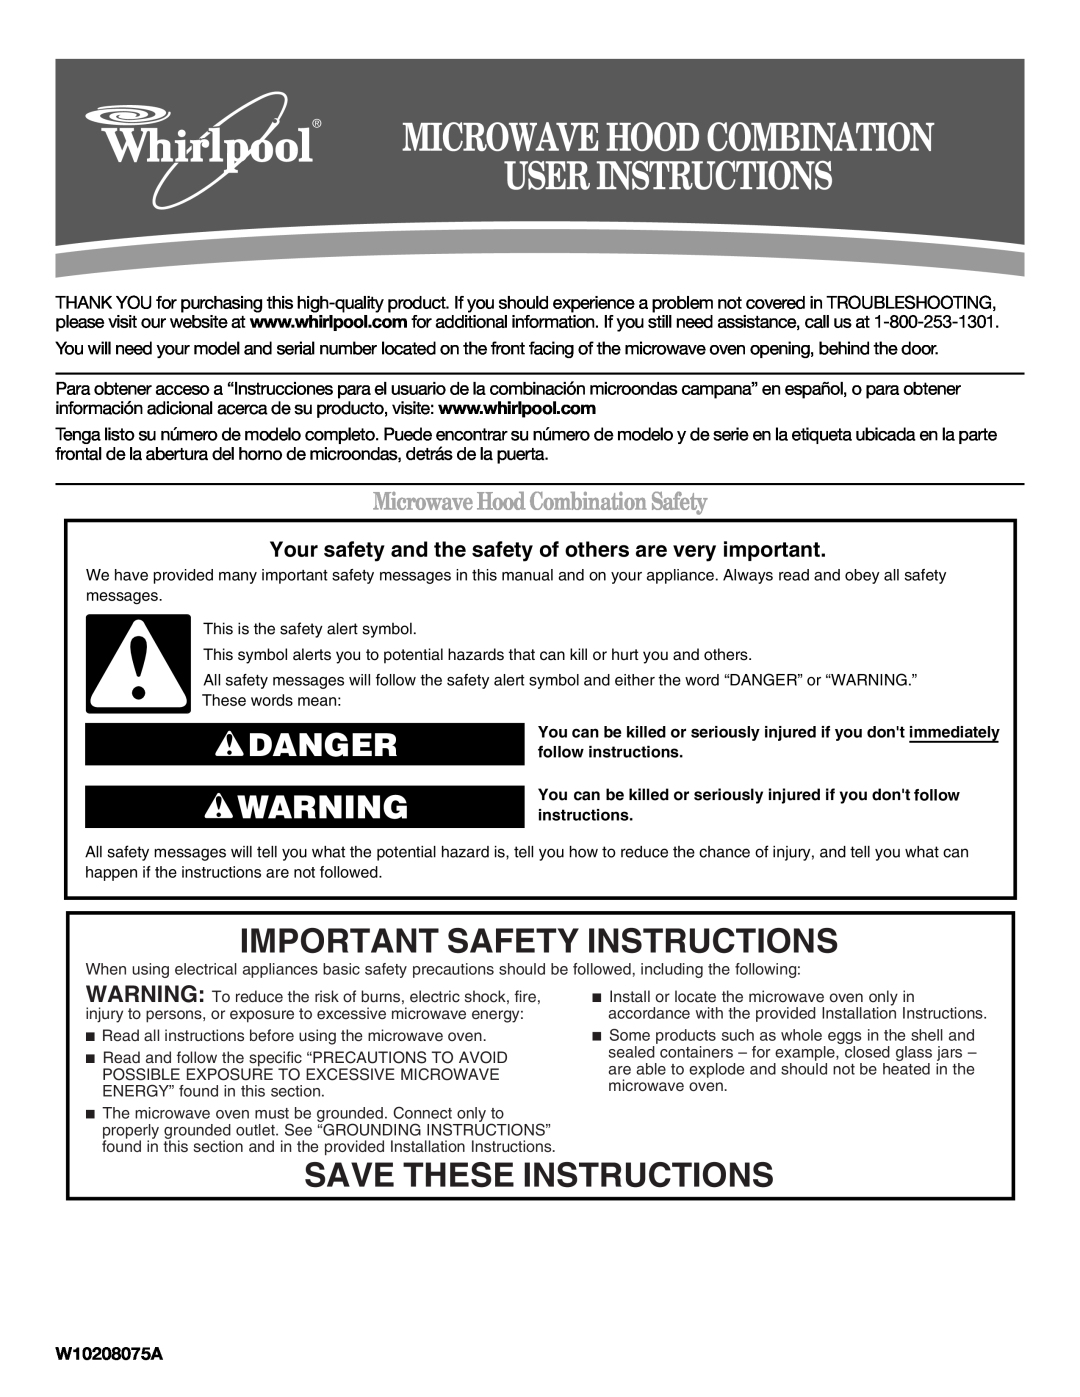 Whirlpool GMH5205XVT important safety instructions Important Safety Instructions, Save These Instructions, W10208075A 